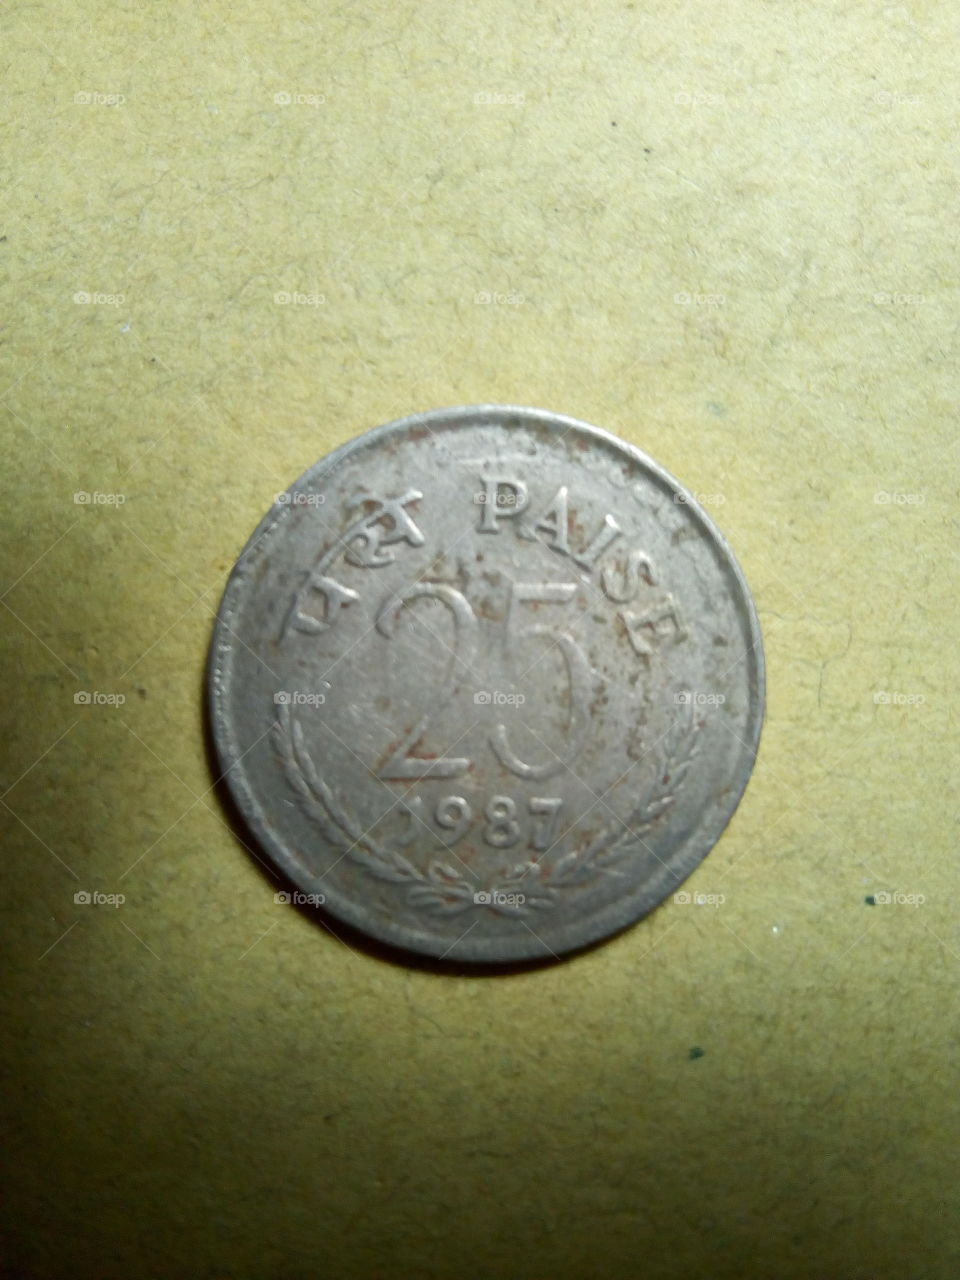 A coin of twenty five paise- 1/4 share of Indian Rupee issued by Government of India in 1987.